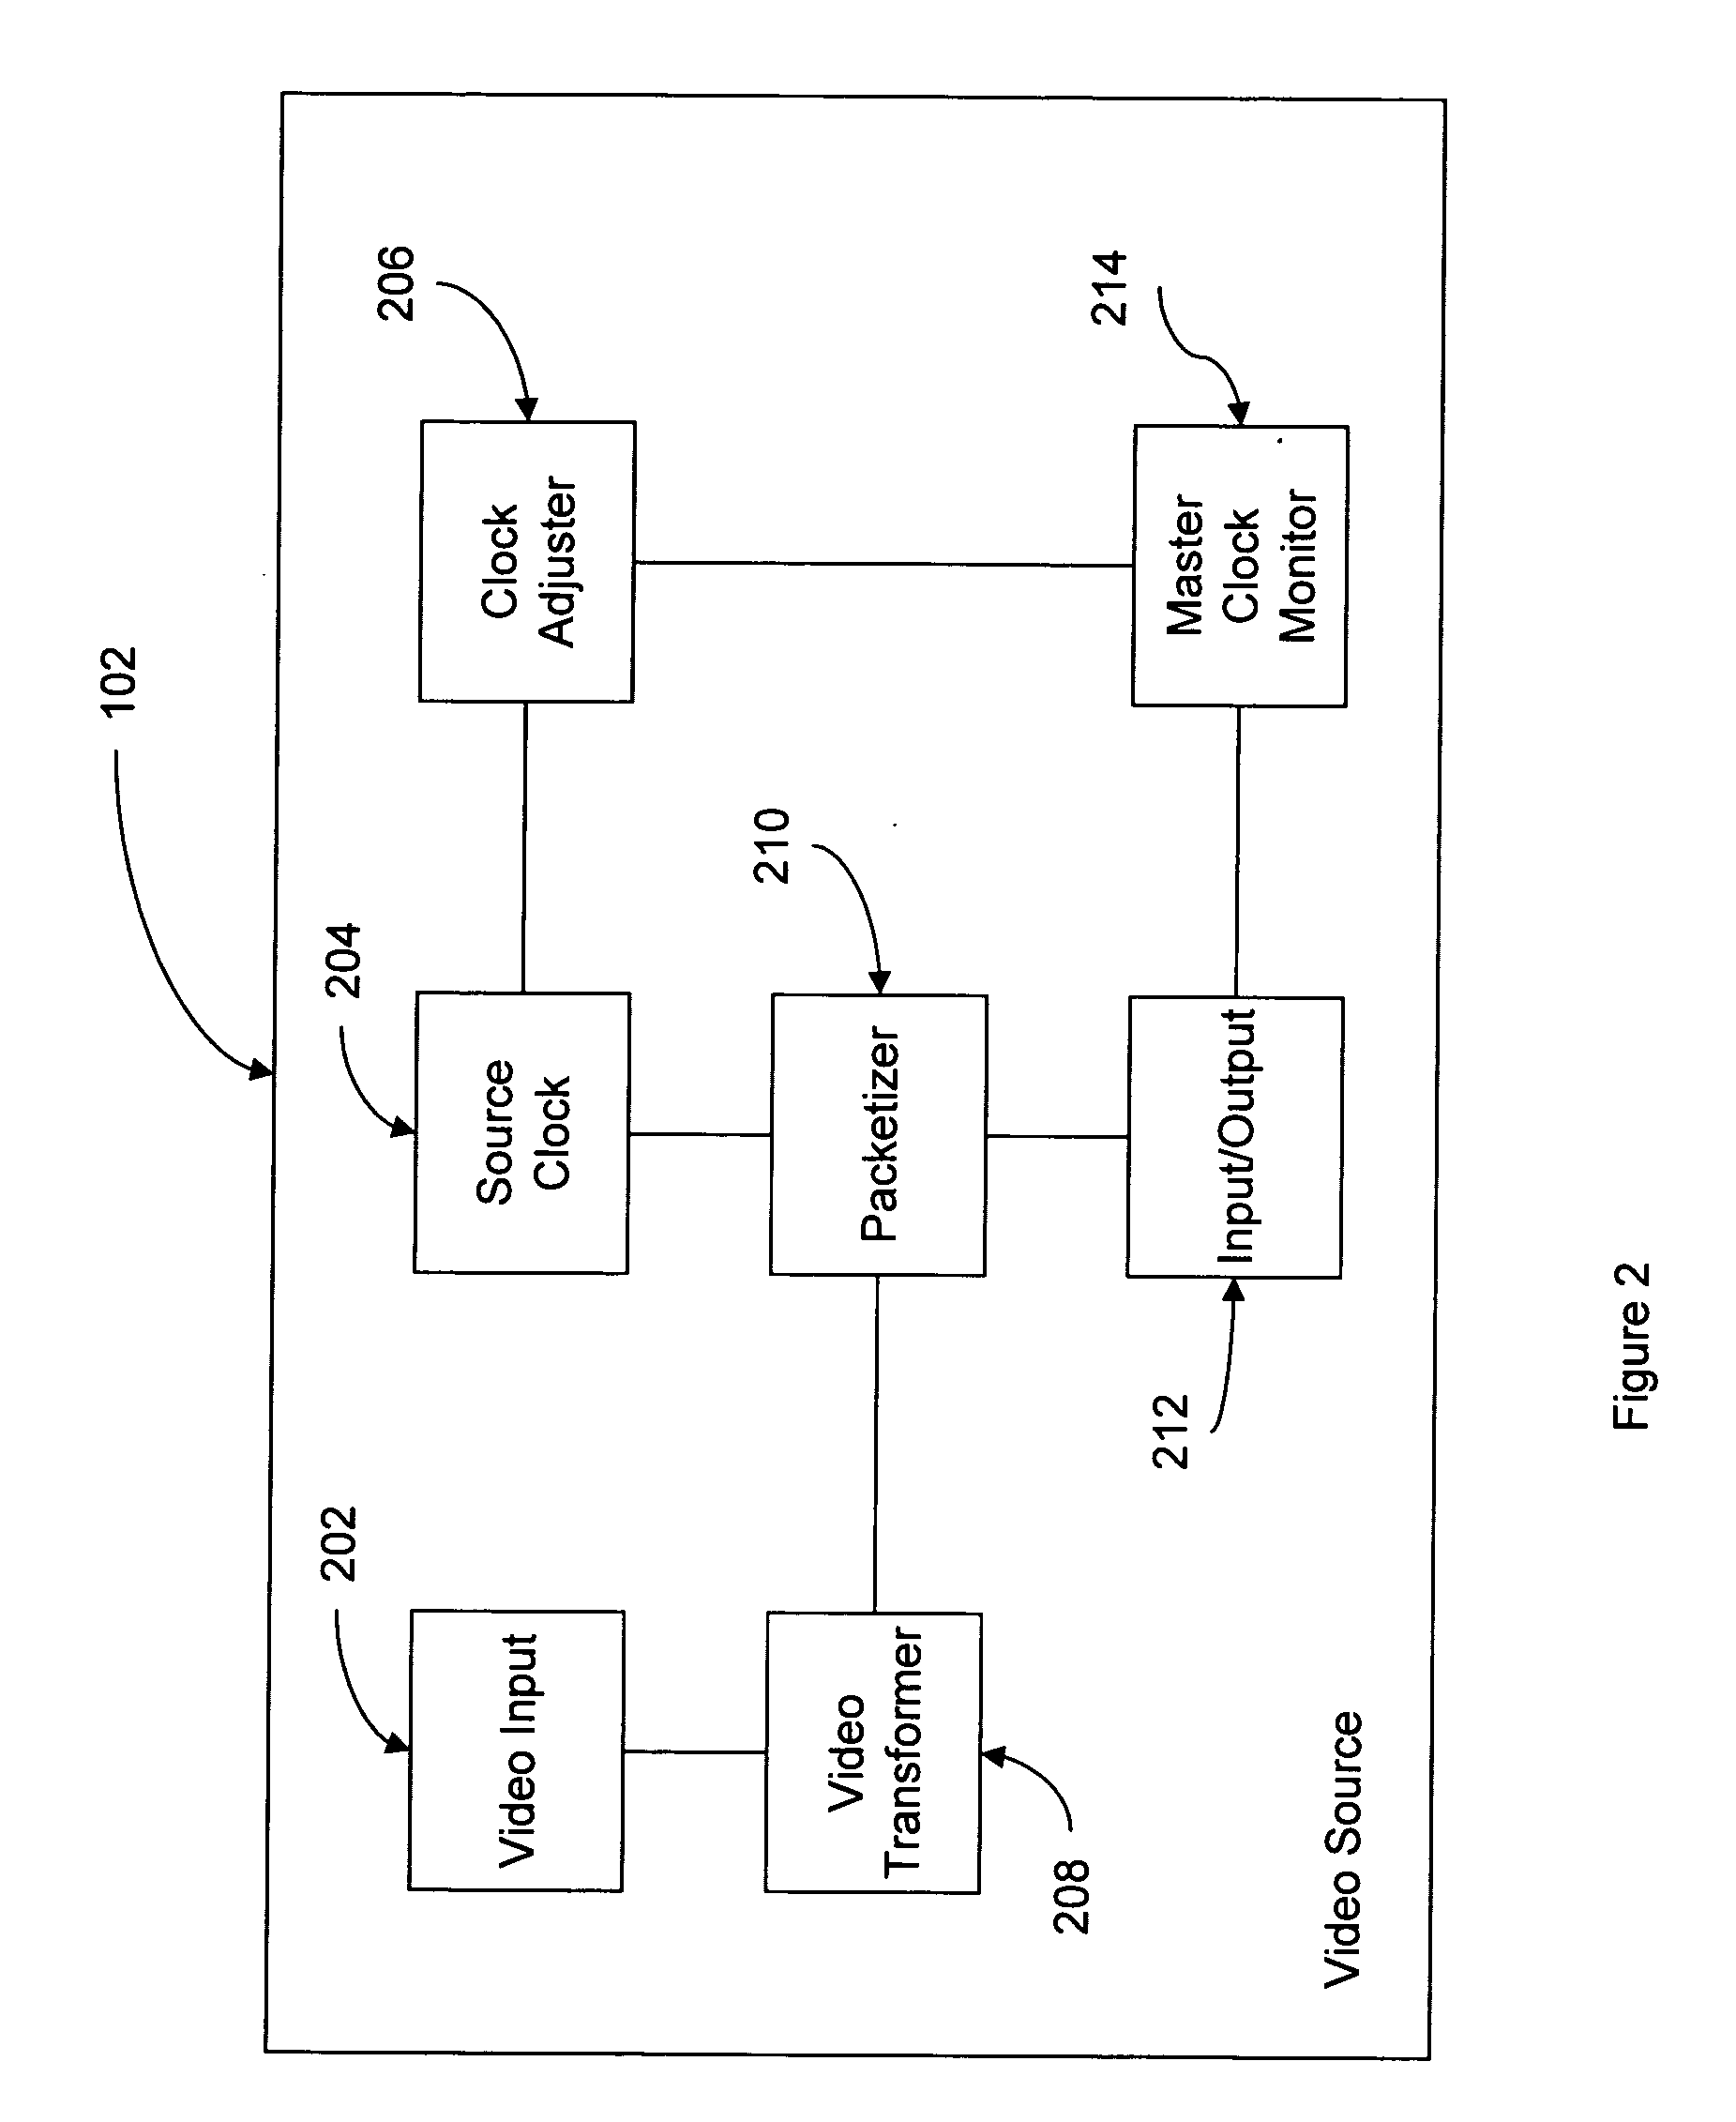 Method and system for live video production over a packeted network